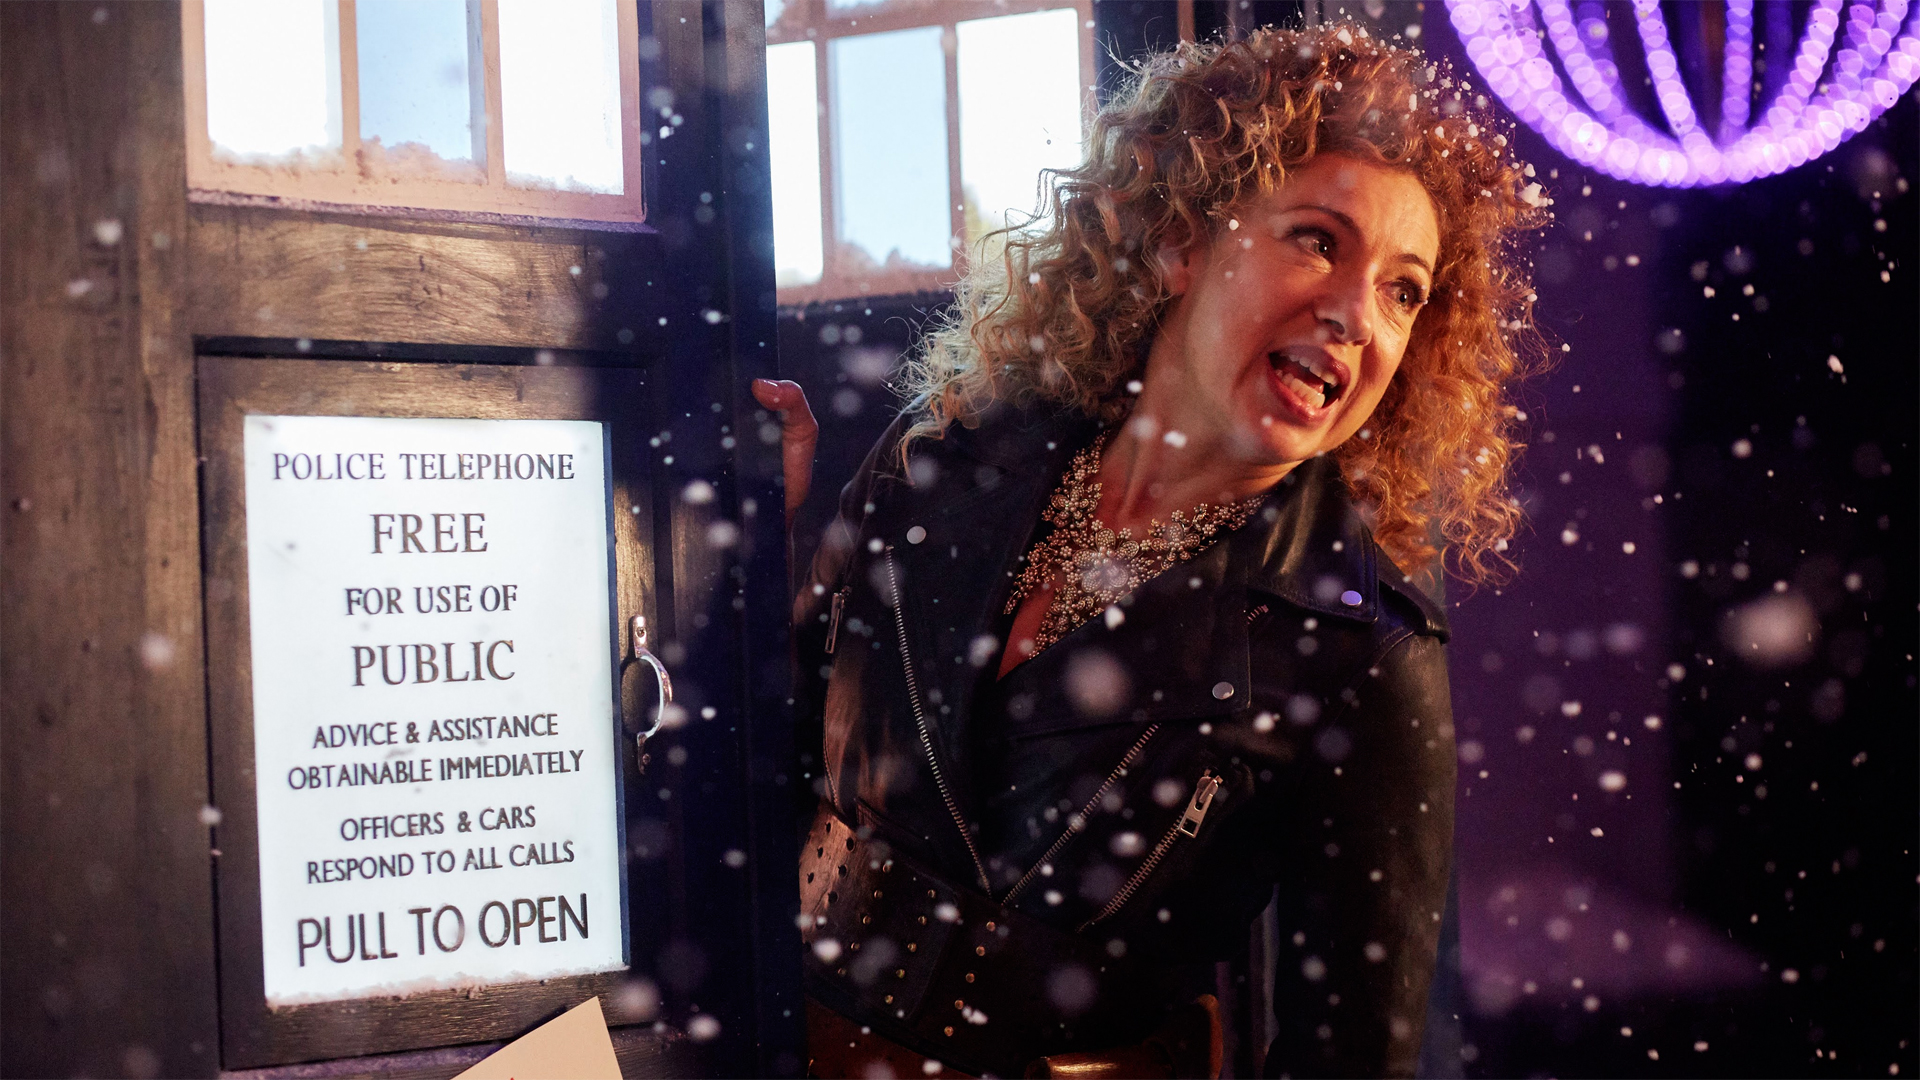 Doctor Whos Day Roundup A Song For River Song Anglophenia Bbc America